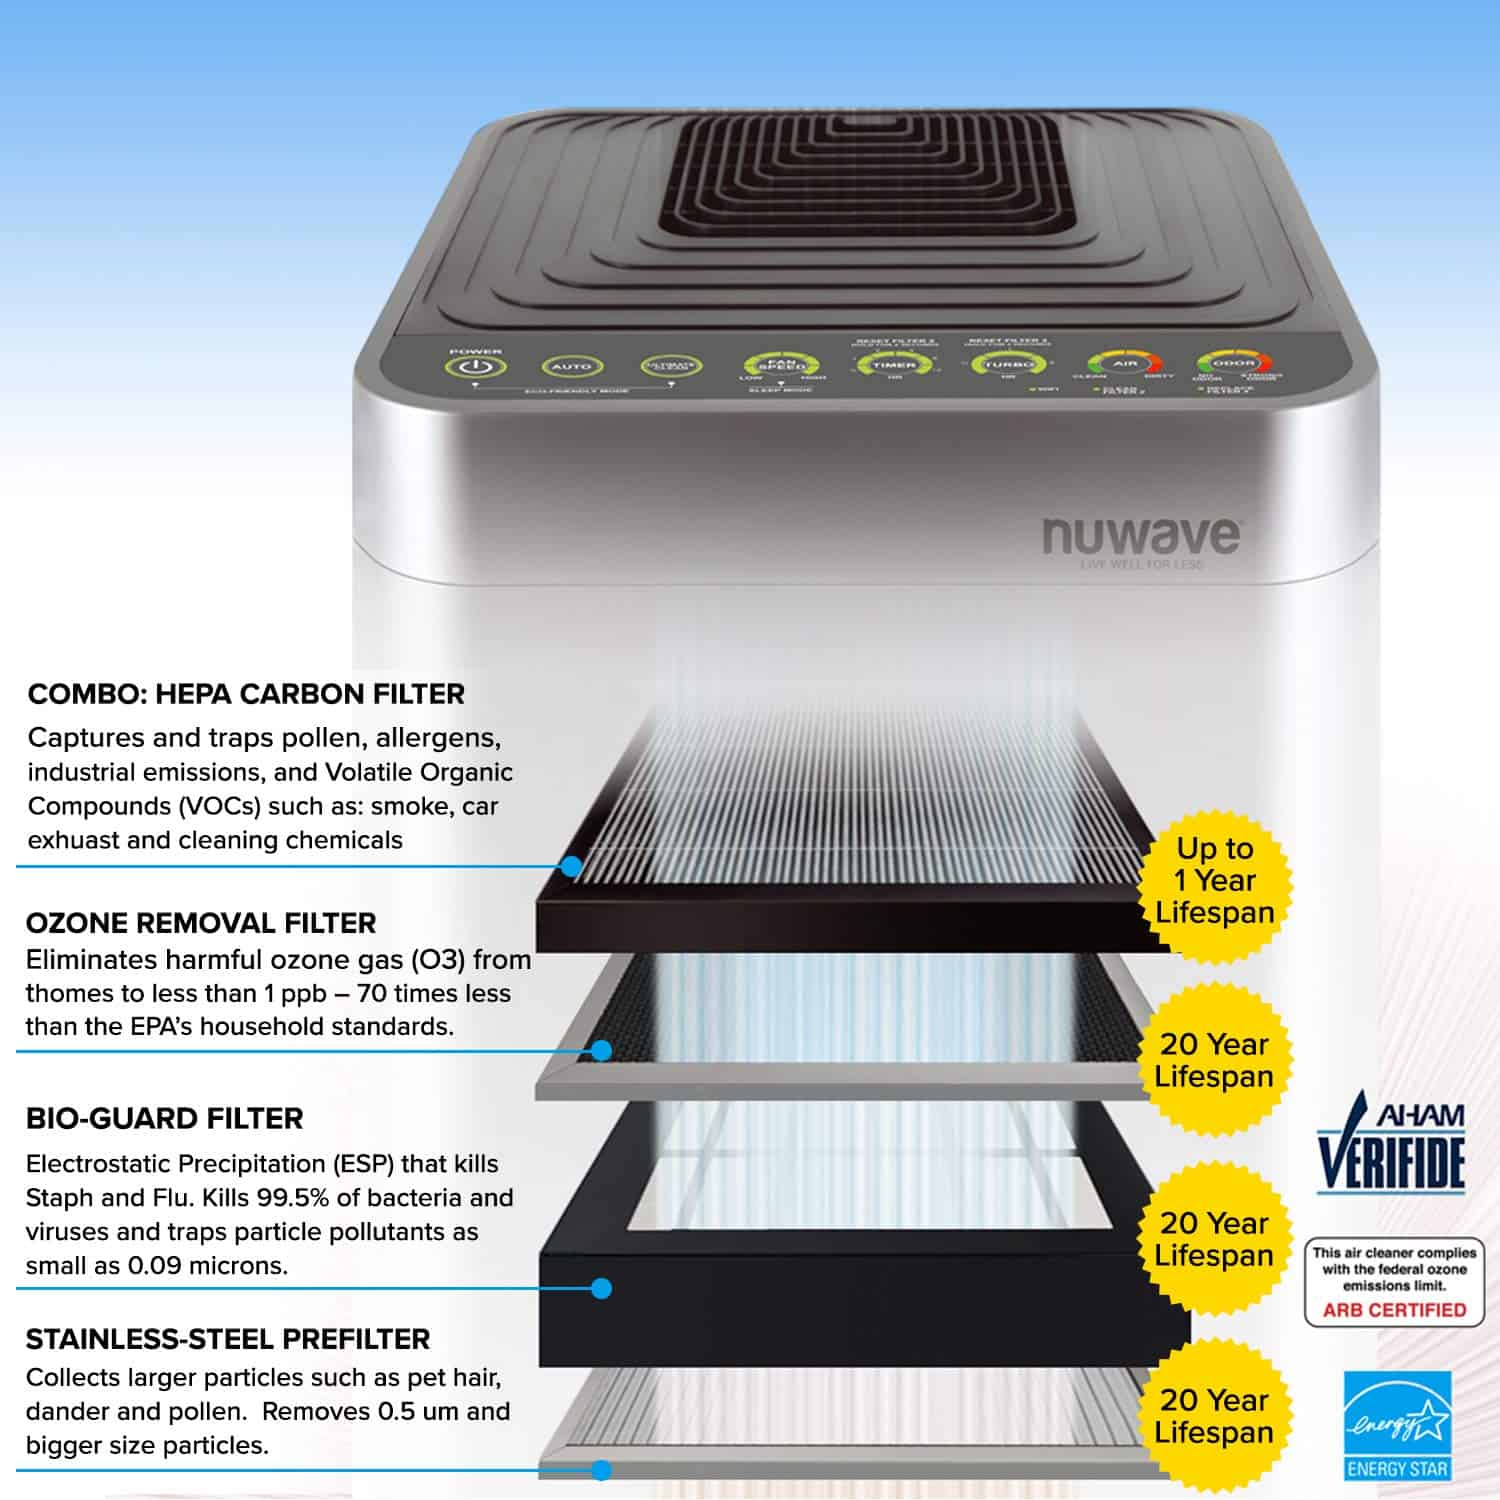 Where to Buy the Nuwave OxyPure Air Purifier?